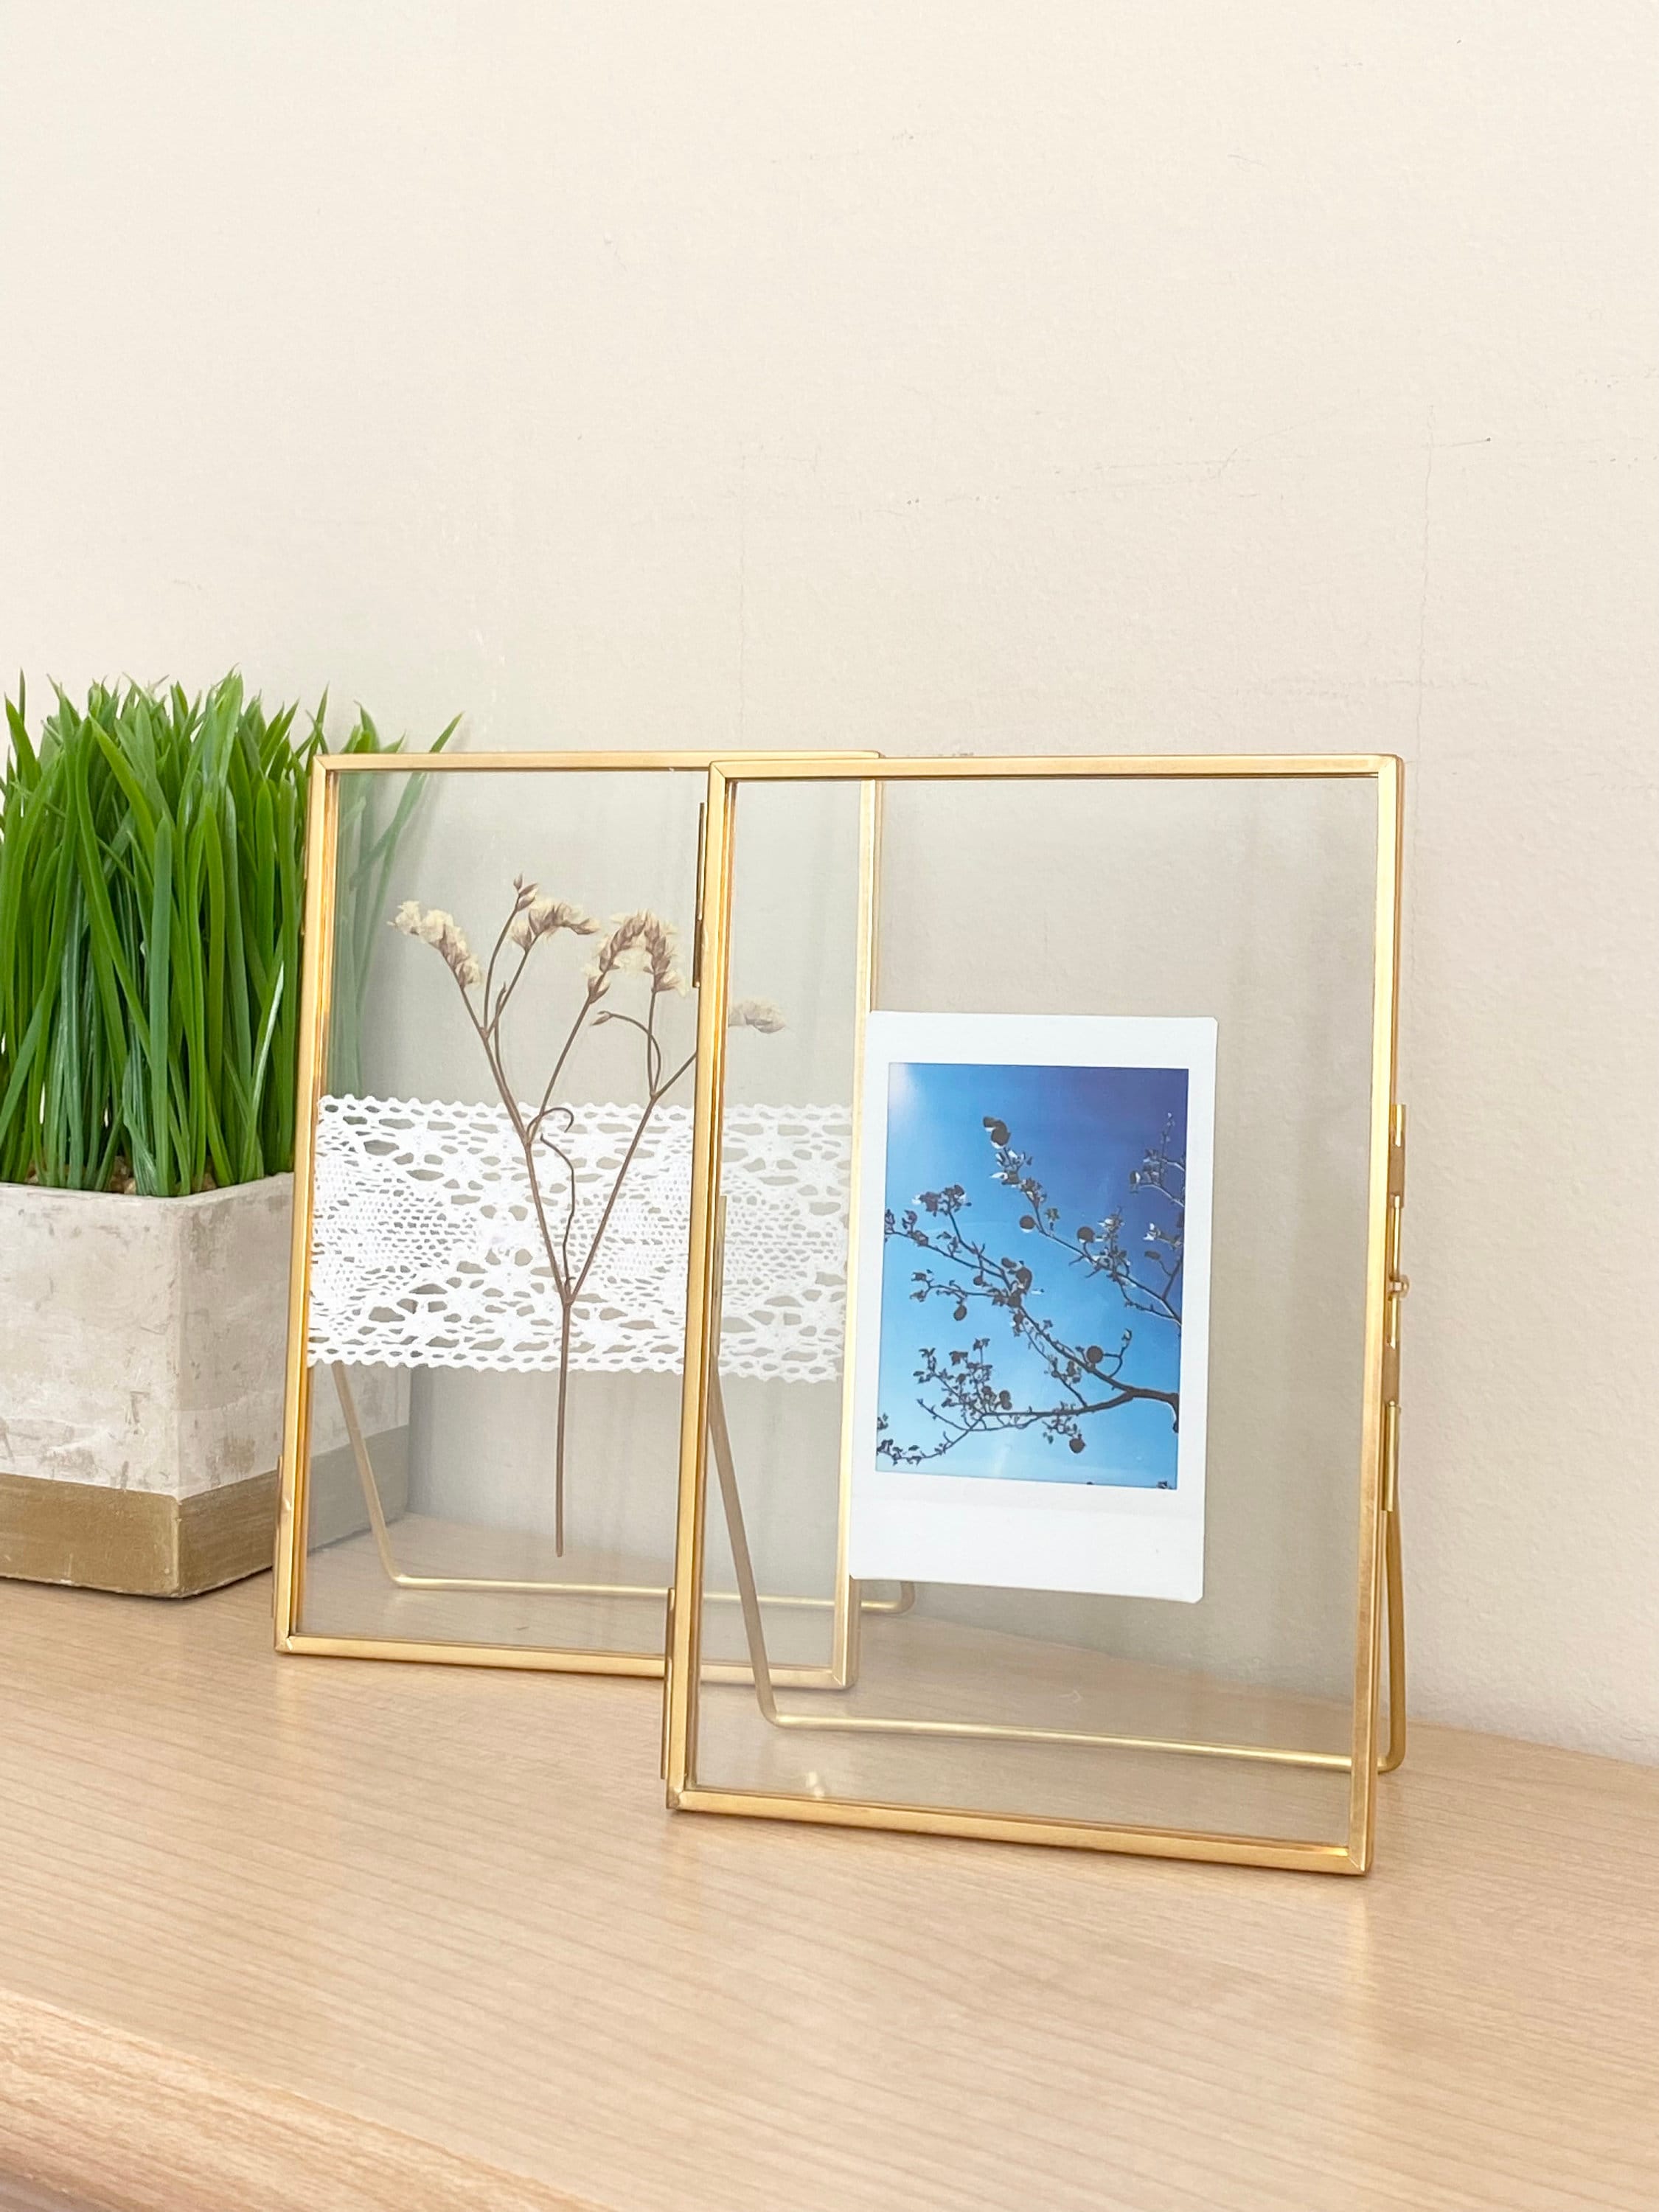 Beedecor Double Glass Frame for Pressed Flowers, Leaf and Artwork - Set of  2 Hanging Picture Frames, Tempered Glass Floating Pressed Flower Frames